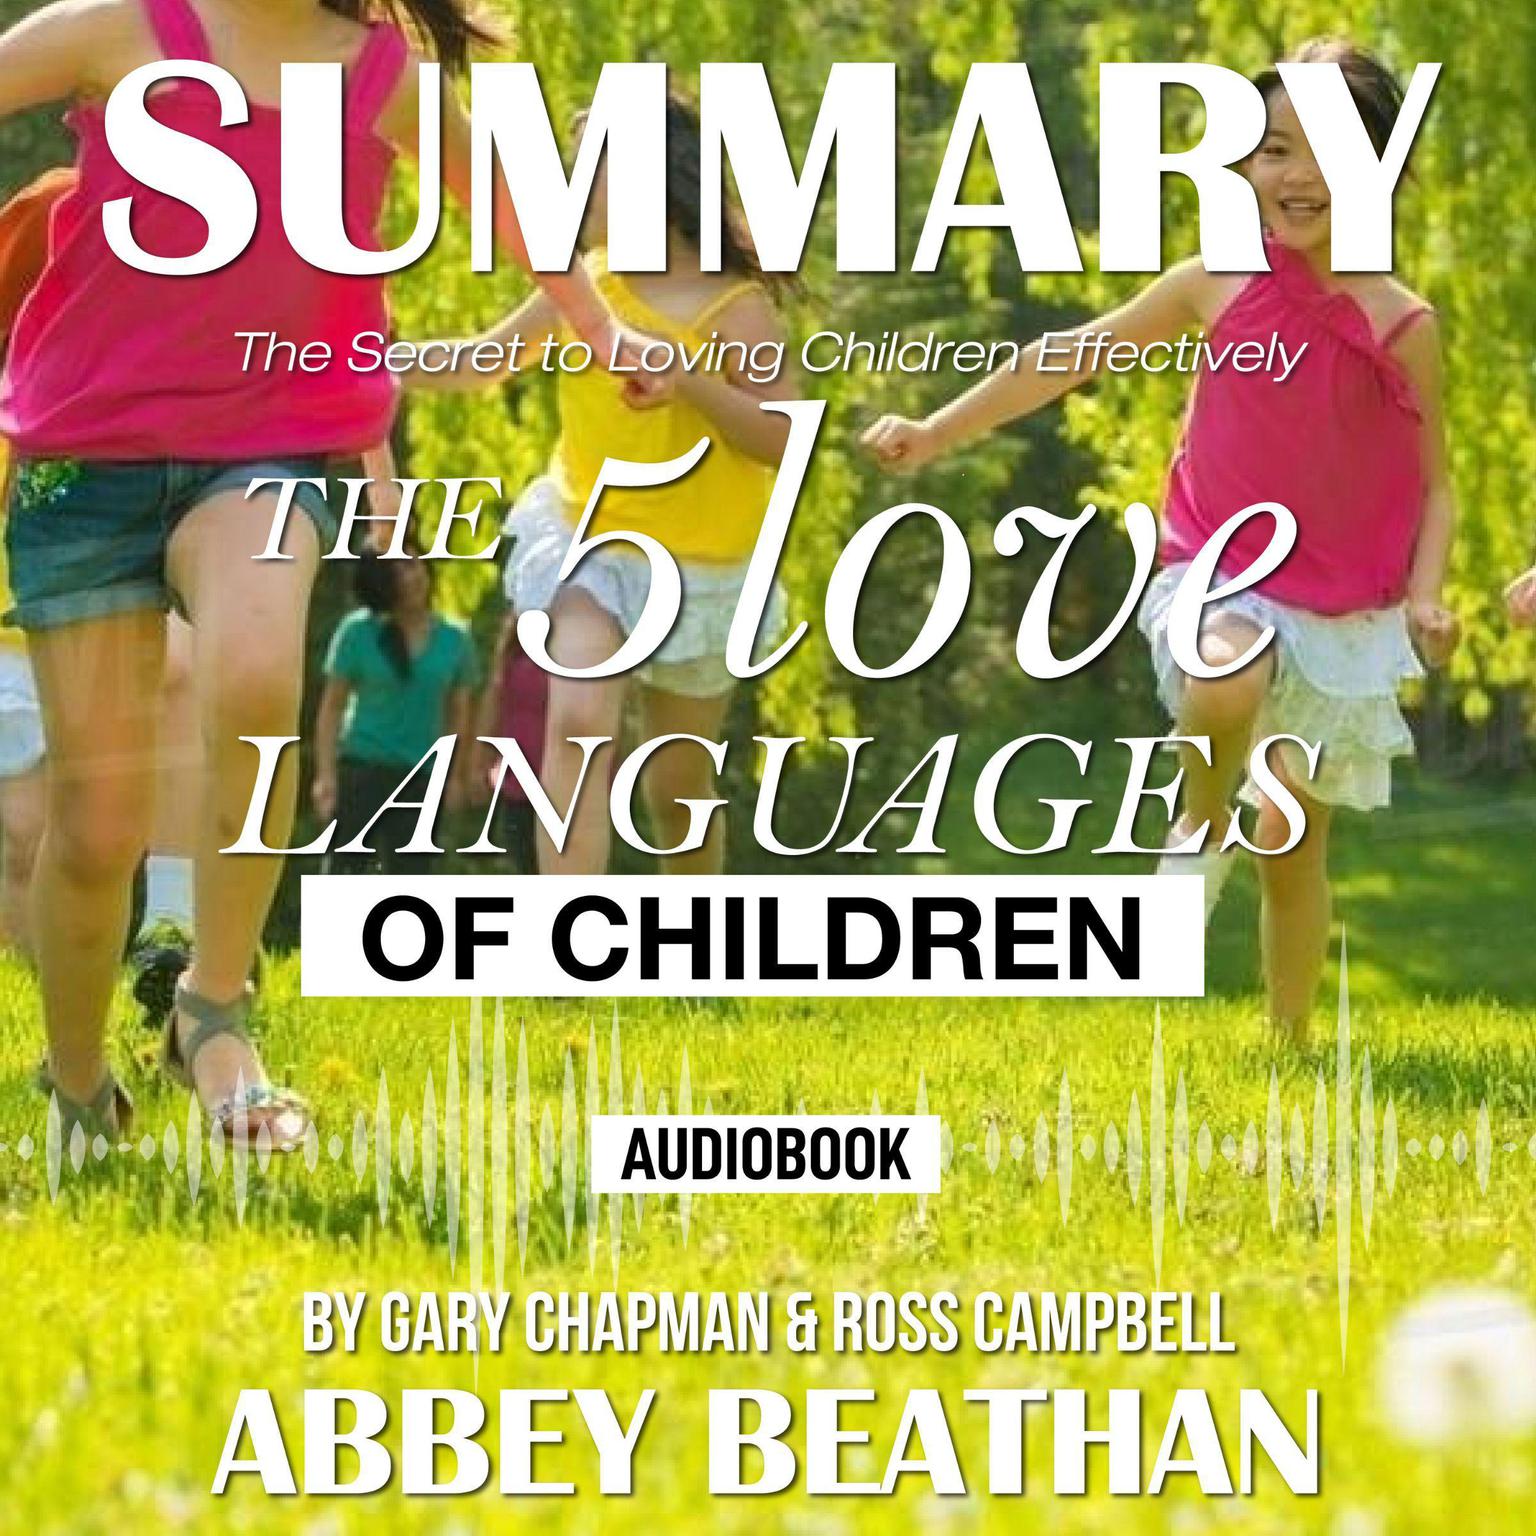 Summary of The 5 Love Languages of Children: The Secret to Loving Children Effectively by Gary Chapman & Ross Campbell Audiobook, by Abbey Beathan